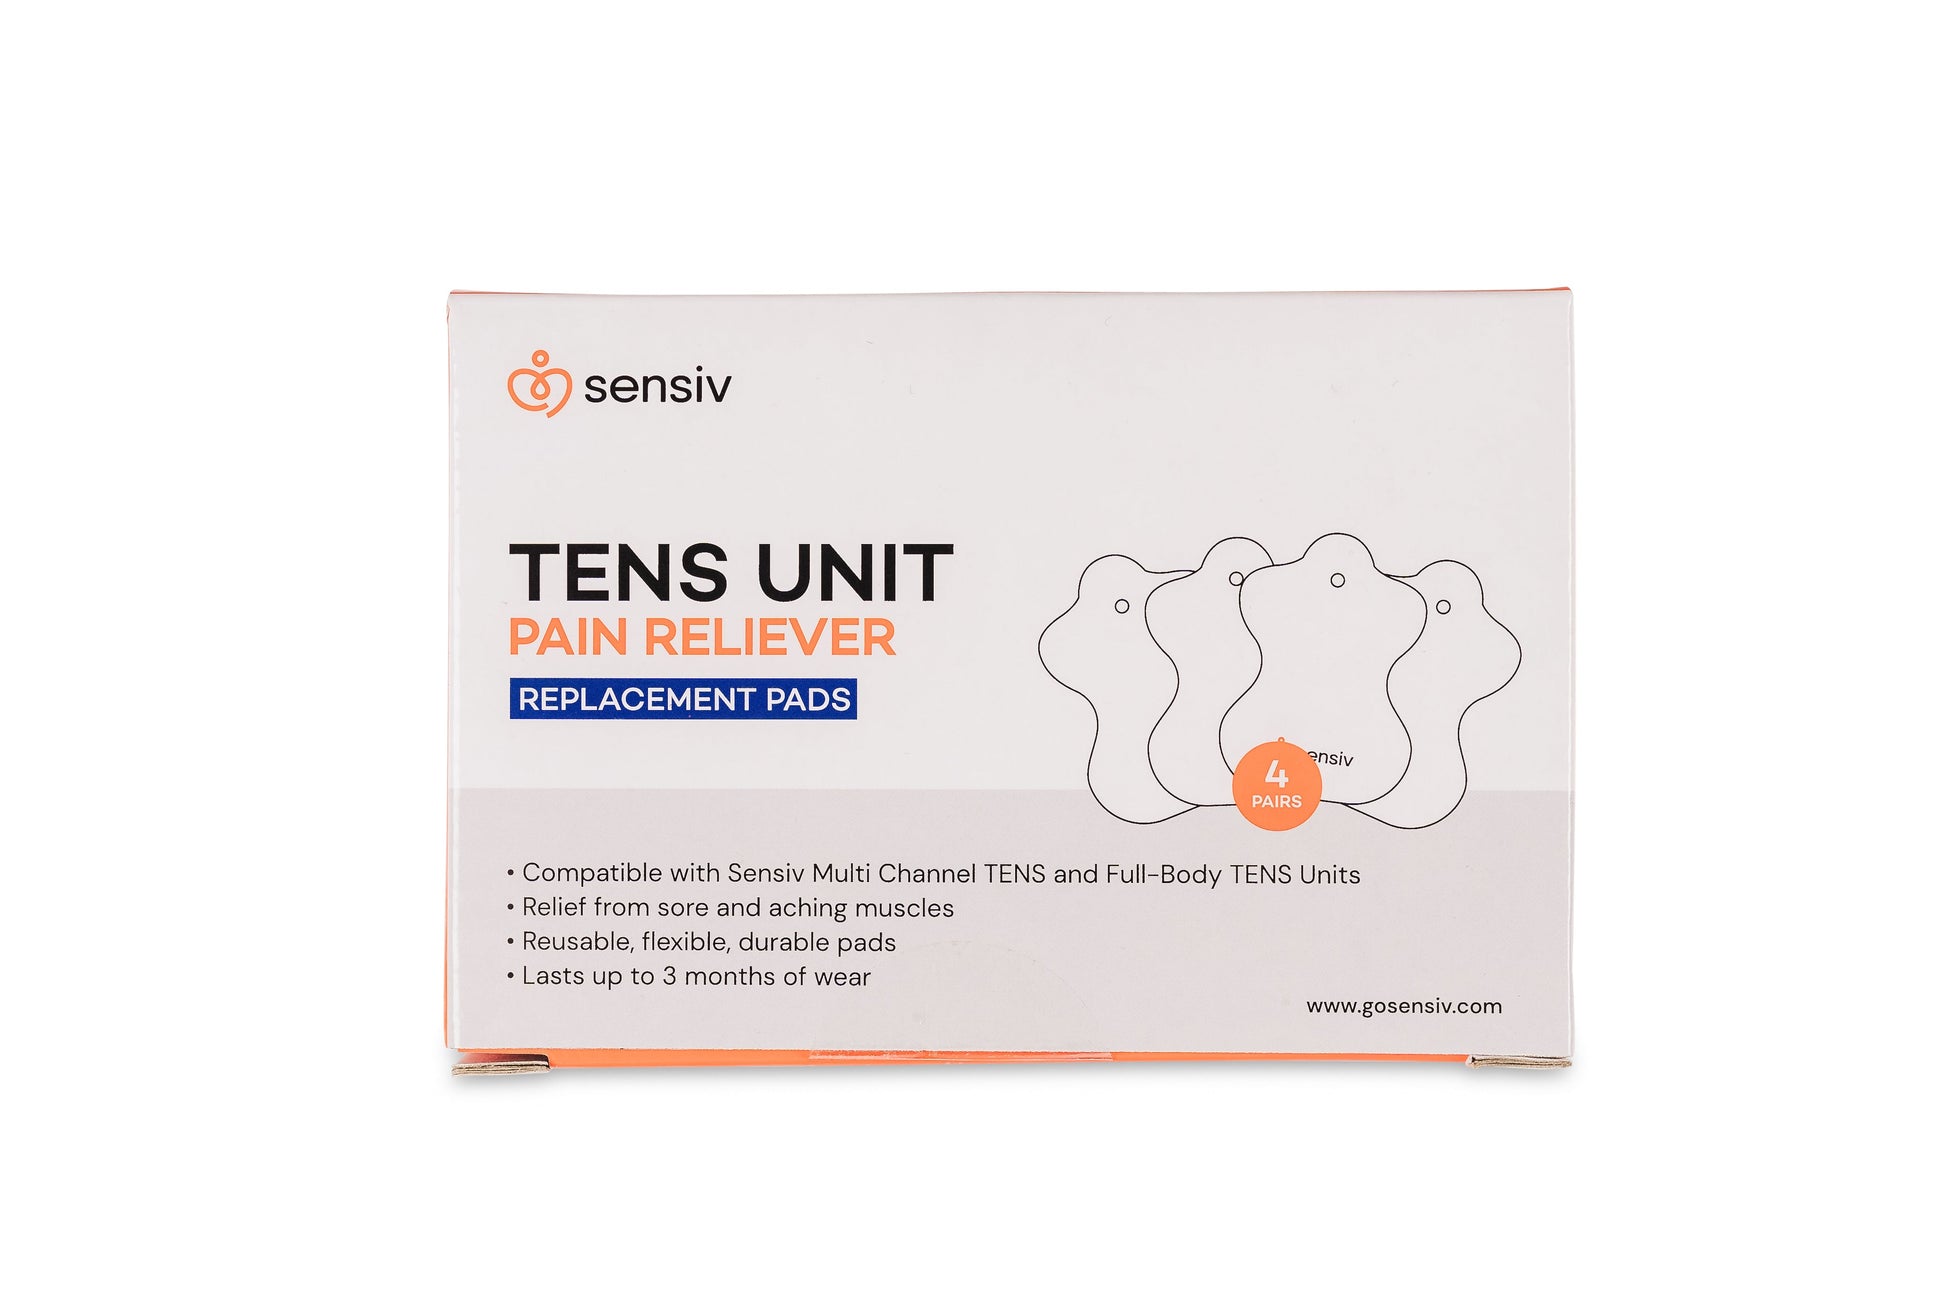 Sensiv Full-Body TENs Pain Relief Therapy with Slippers